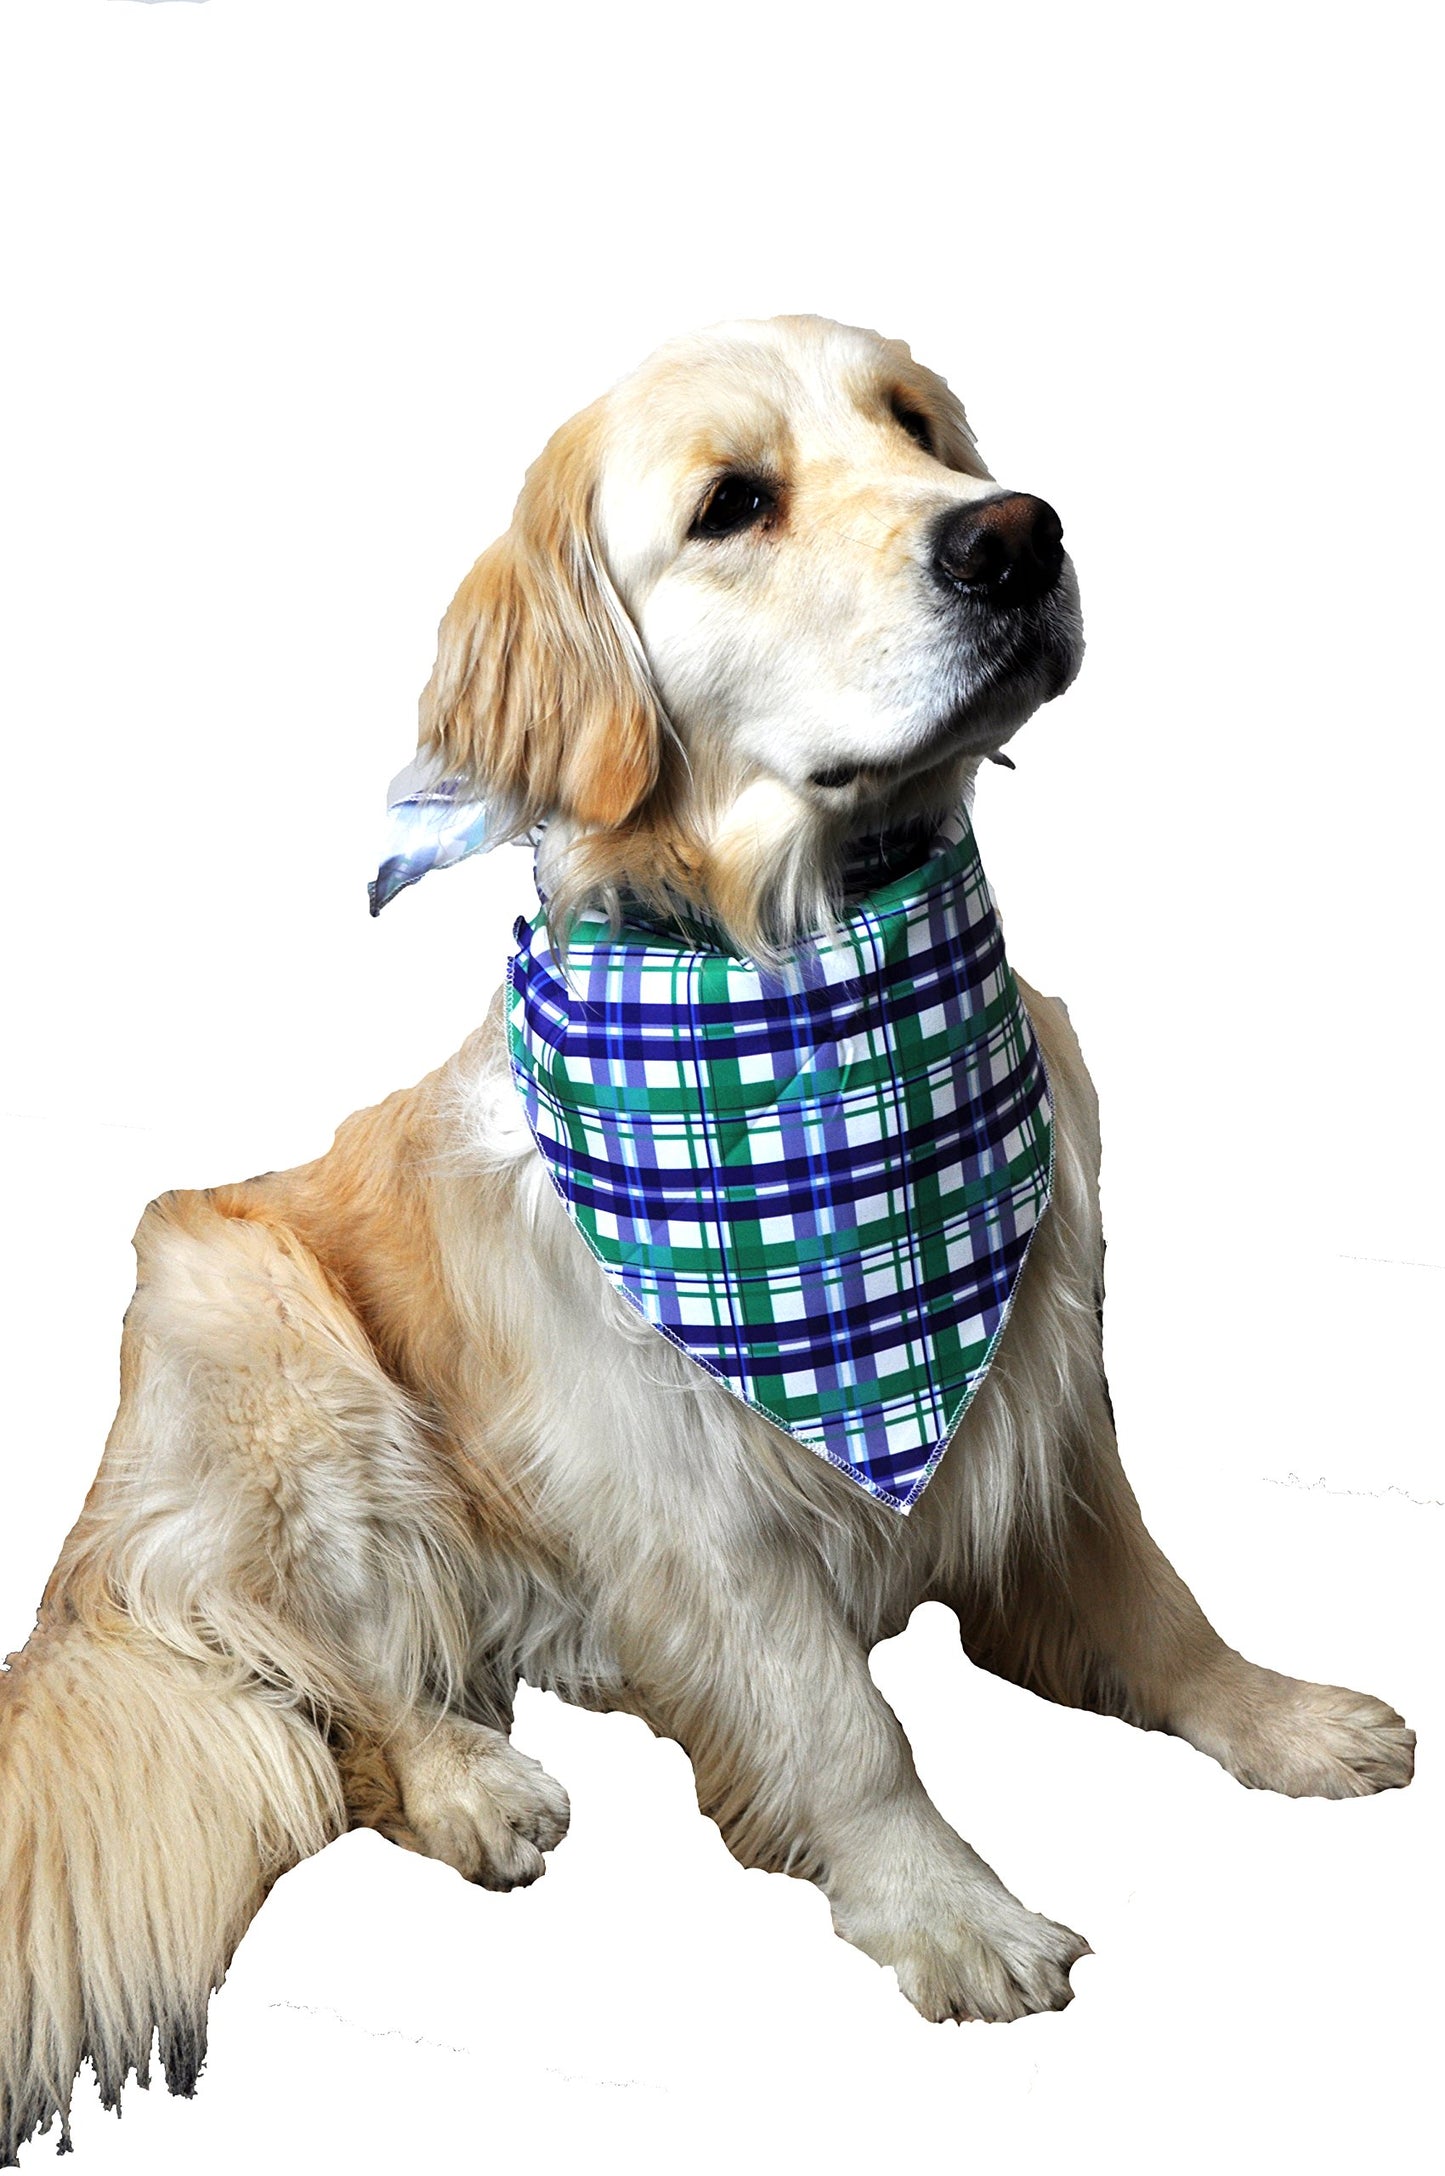 Downtown Pet Supply Premium Dog Pet Bandanas, Birthday, American Flag, Plad Scarfs for Dogs in Bulk Set - Great for Small and Large Pets